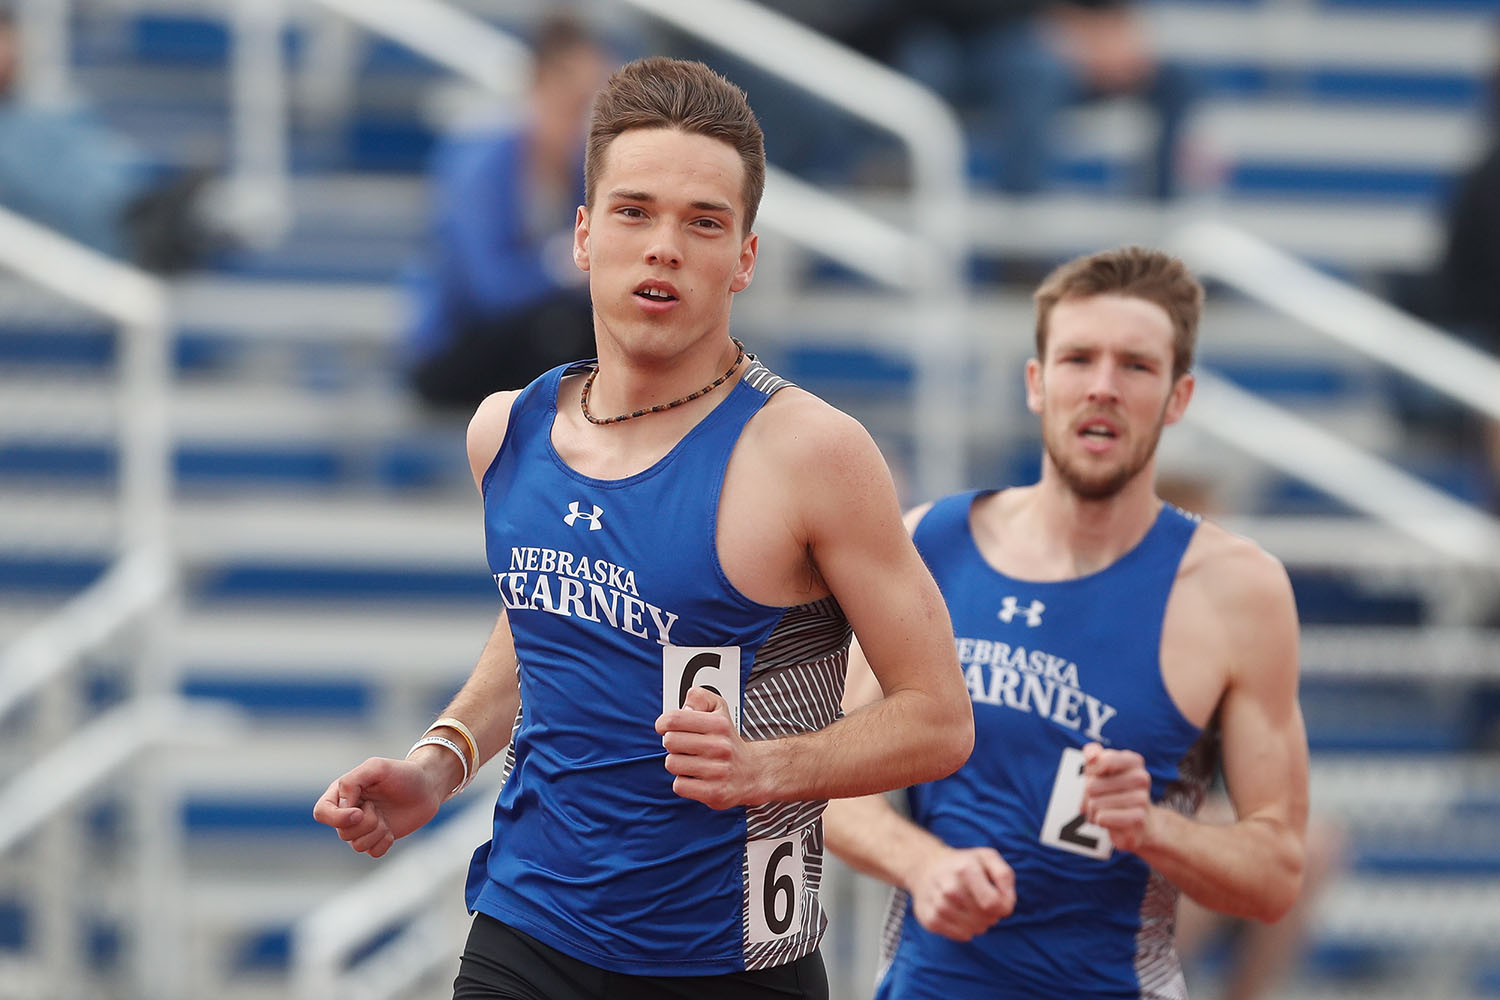 Nate Pierce, left, ranks third in UNK history in the outdoor 1,500-meter run (3:52.65), fifth in the indoor mile (4:10.75) and eighth in the indoor 1,000-meter run (2:31.18). He was also part of the distance medley relay team that set UNK and MIAA Indoor Track and Field Championships records with a time of 9:55.17. (Photo by Corbey R. Dorsey, UNK Communications)